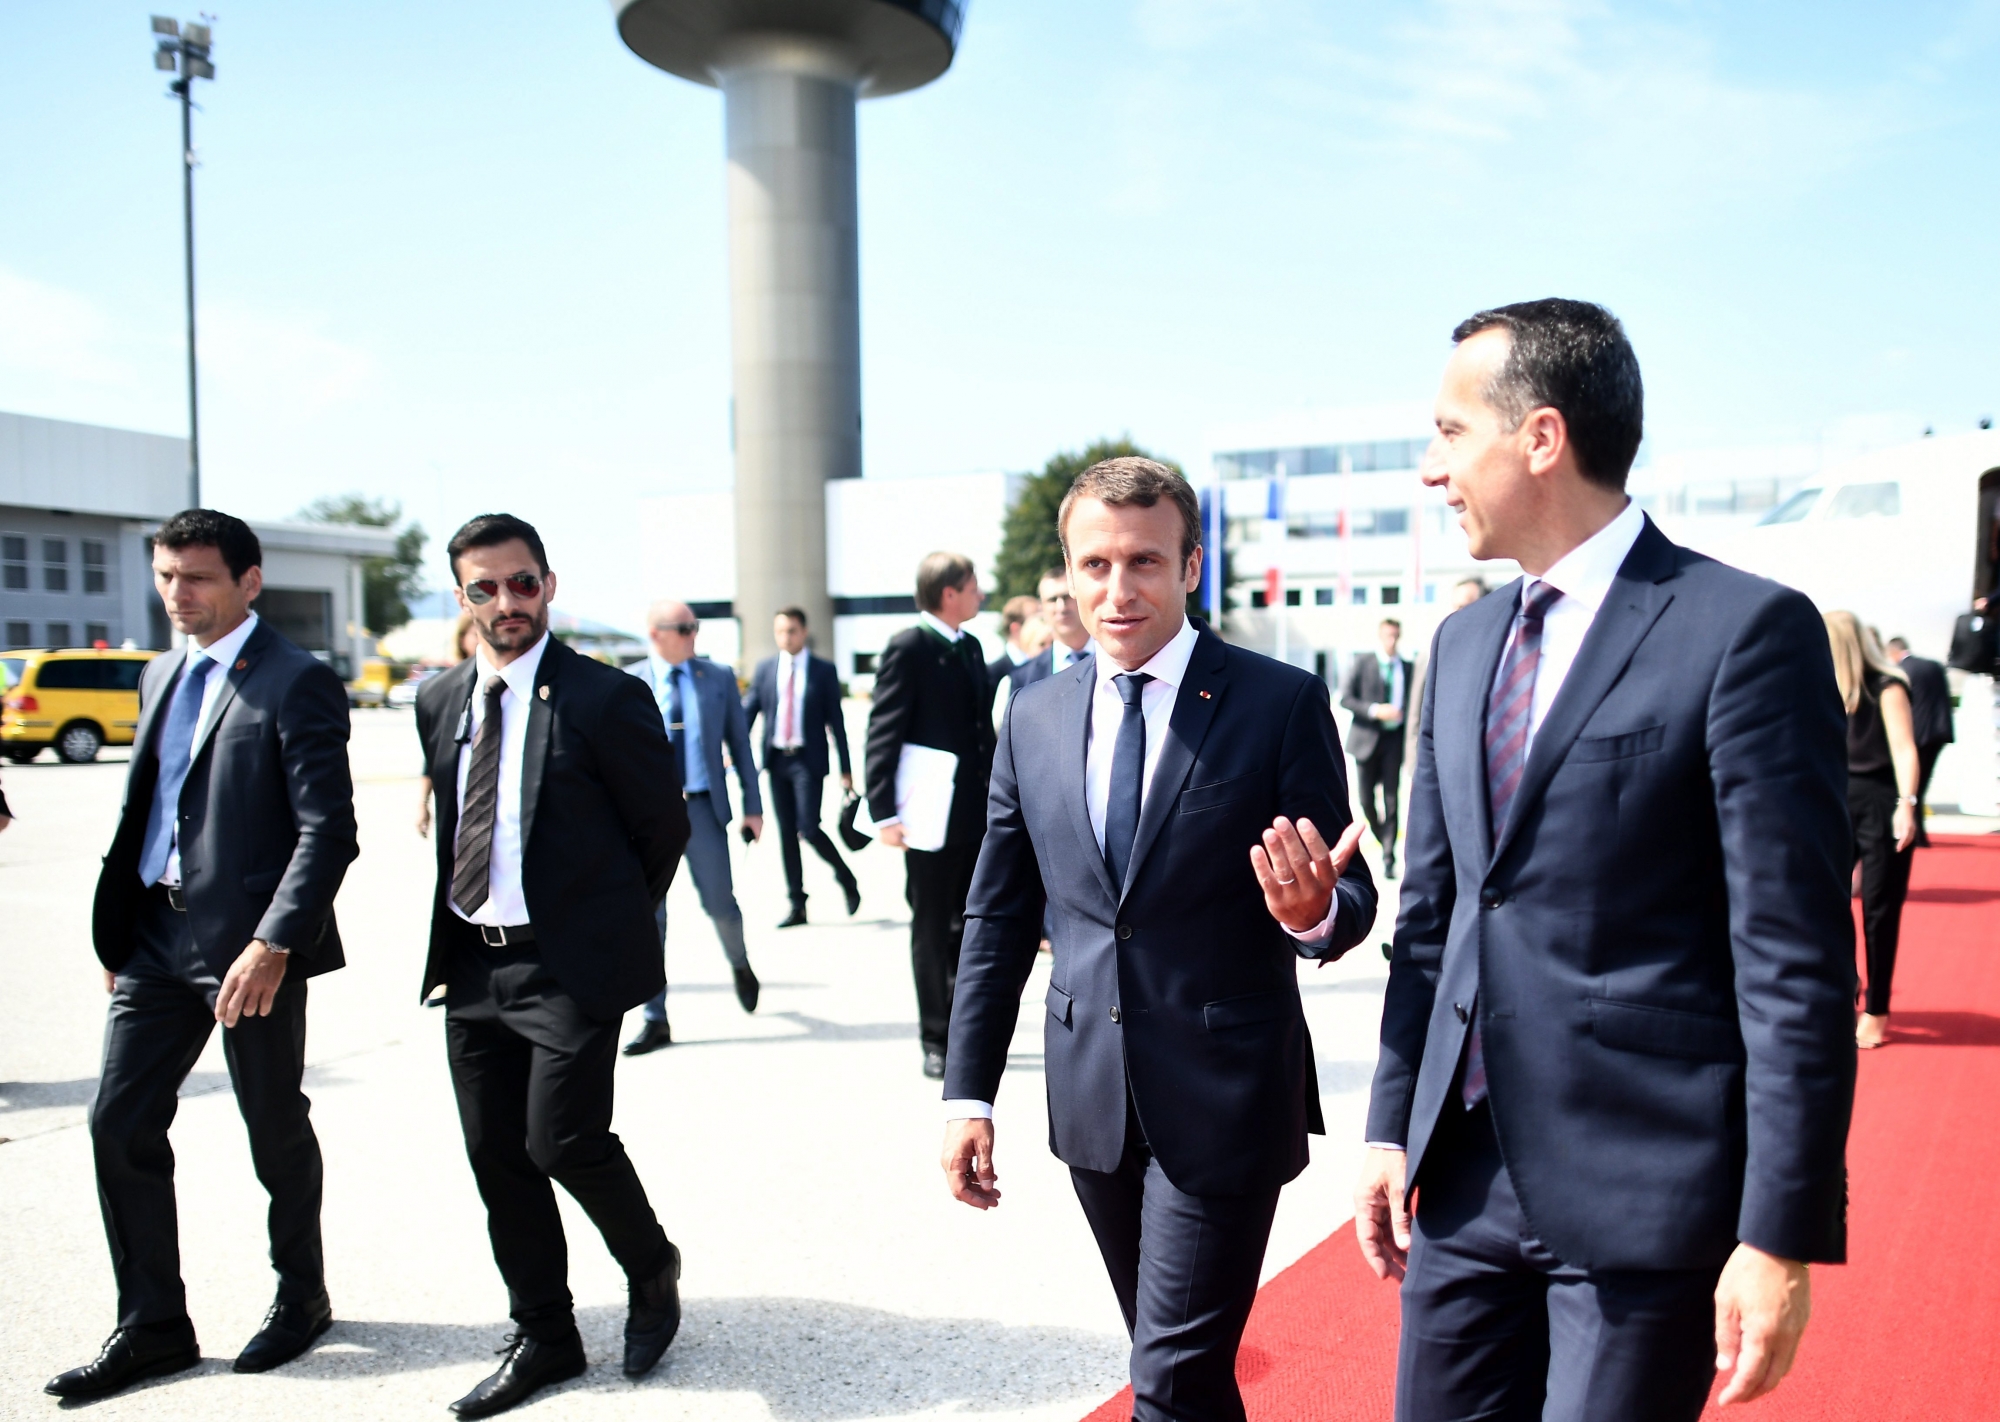 epa06157738 French President Emmanuel Macron (2-R) and Austrian Chancellor Christian Kern (R) talk at the Salzburg airport ahead of the Salzburg Summit of Heads of State and Government of the Republic of Austria, the French Republic, the Czech Republic and the Slovak Republic in Salzburg, Austria, 23 August 2017. Macron attends the 'Austerlitz Format', which includes Republic of Austria, Czech Republic and Slovak Republic, as a guest of honor in Salzburg.  EPA/CHRISTIAN BRUNA AUSTRIA SUMMITS